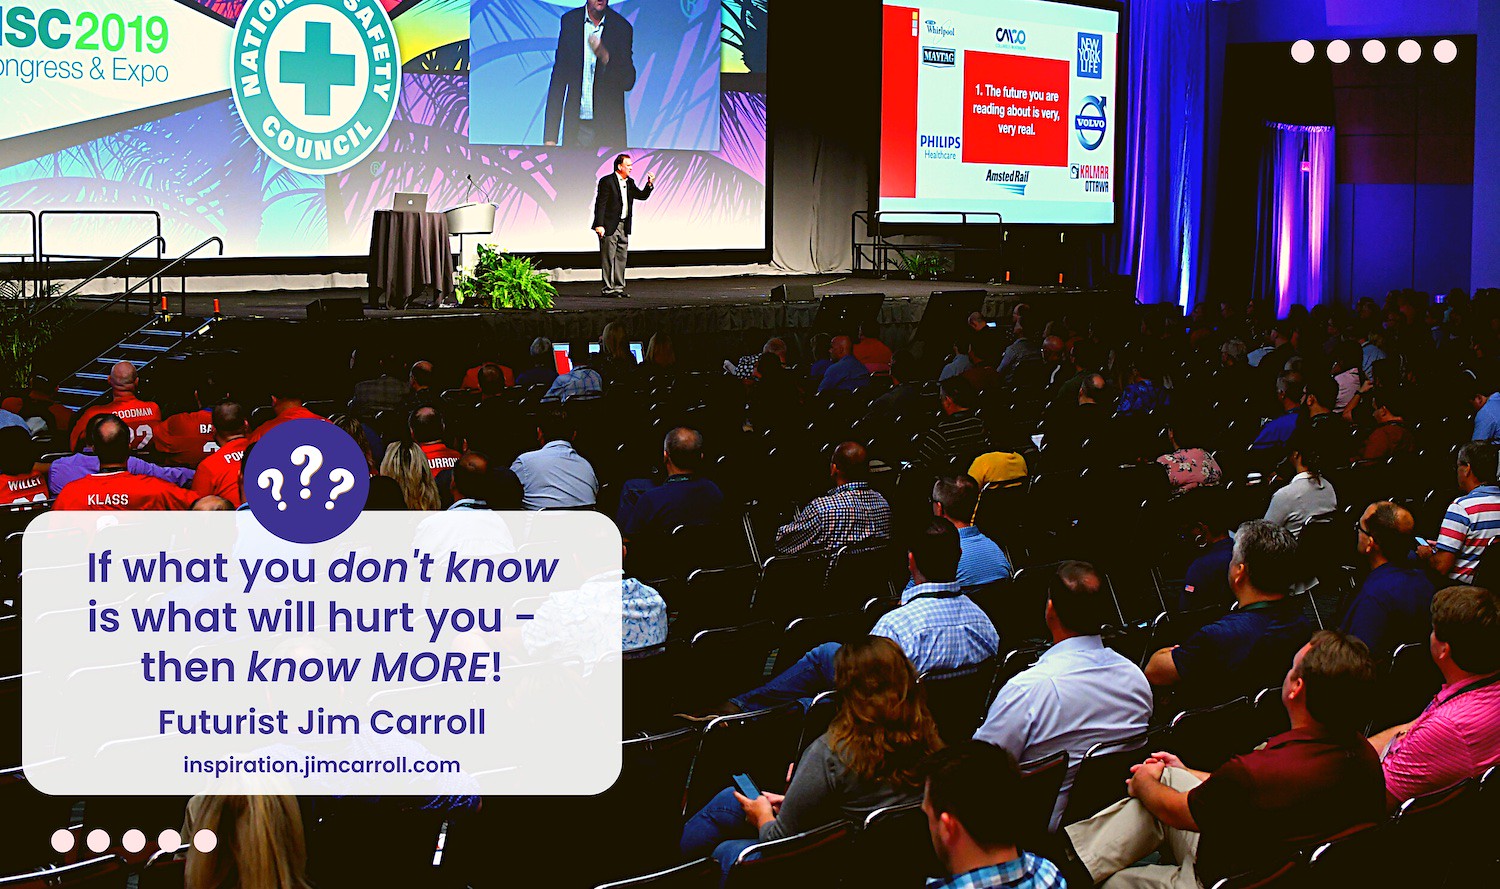 At this very mo“If what you don’t know is what will hurt you – then know MORE!” - Futurist Jim Carroll